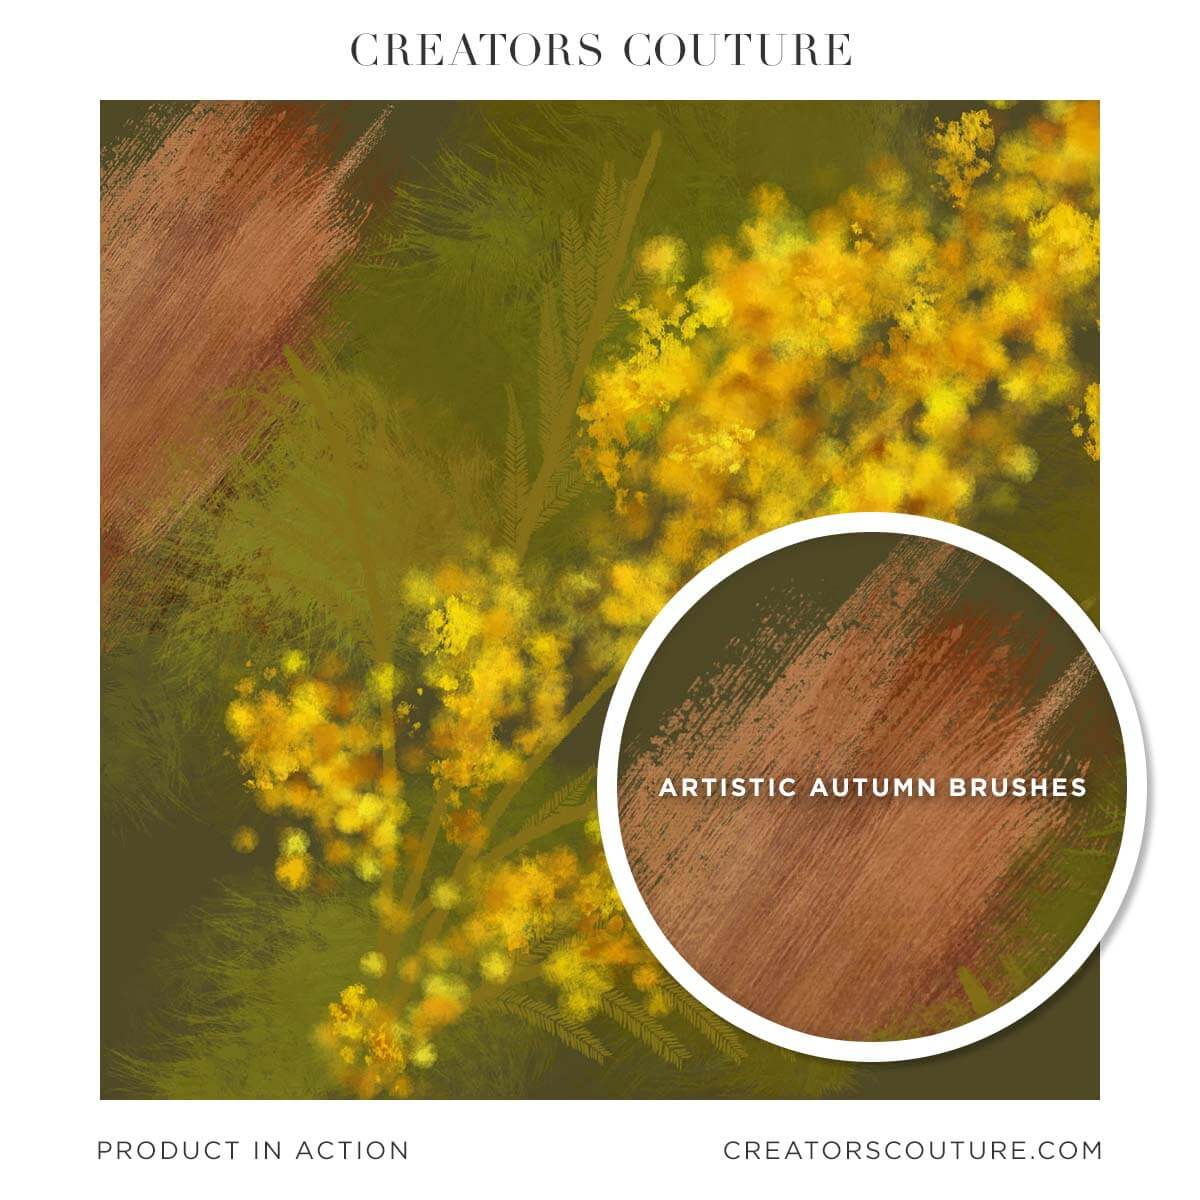 Abstract illustration of mimosa branch with a zoom on the artistic autumn multicolor brush 